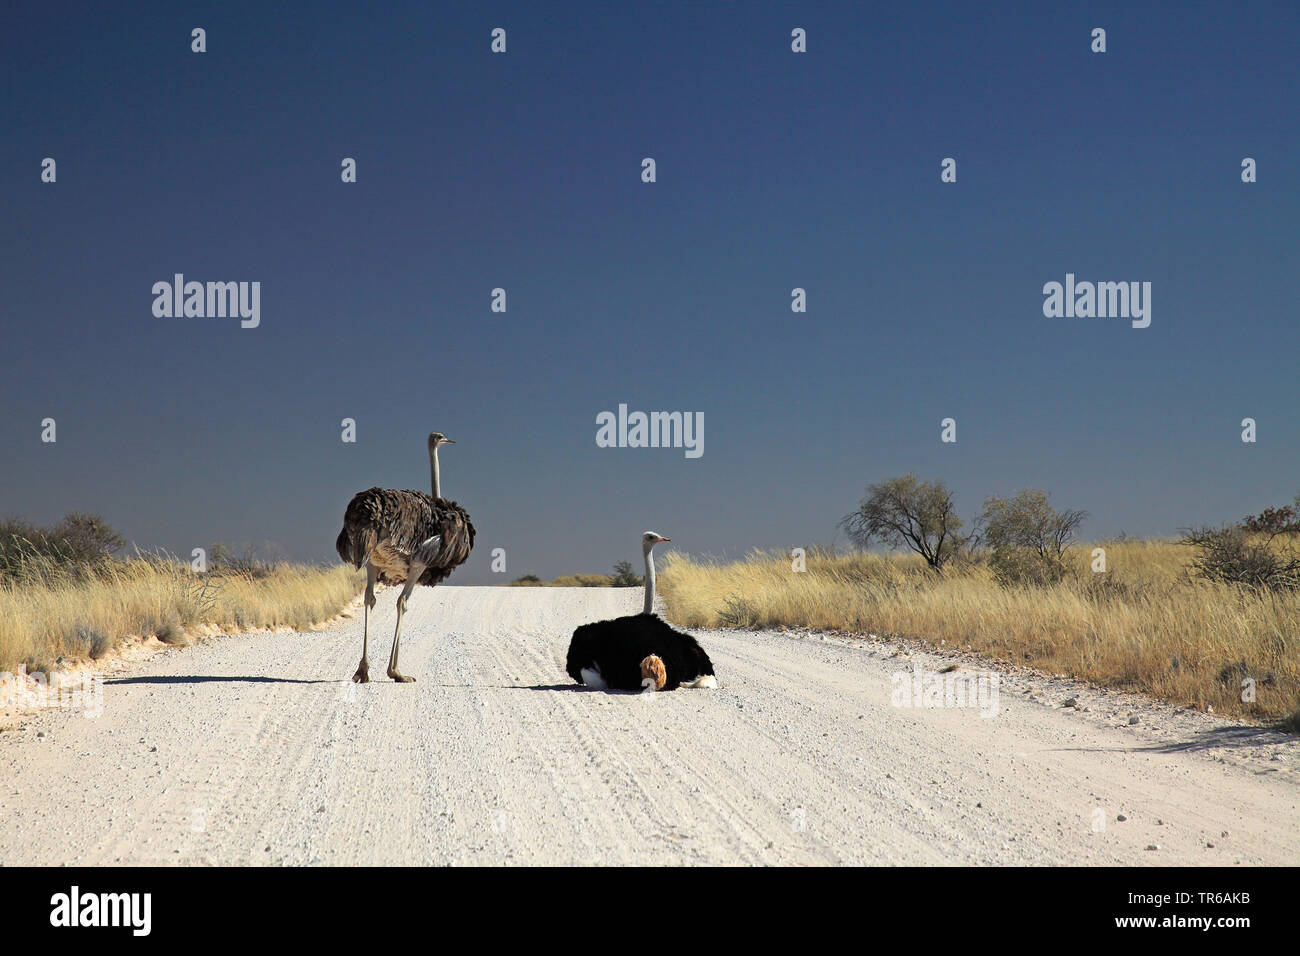 ostrich (Struthio camelus), pair on a track near Eland, South Africa, Kgalagadi Transfrontier National Park Stock Photo